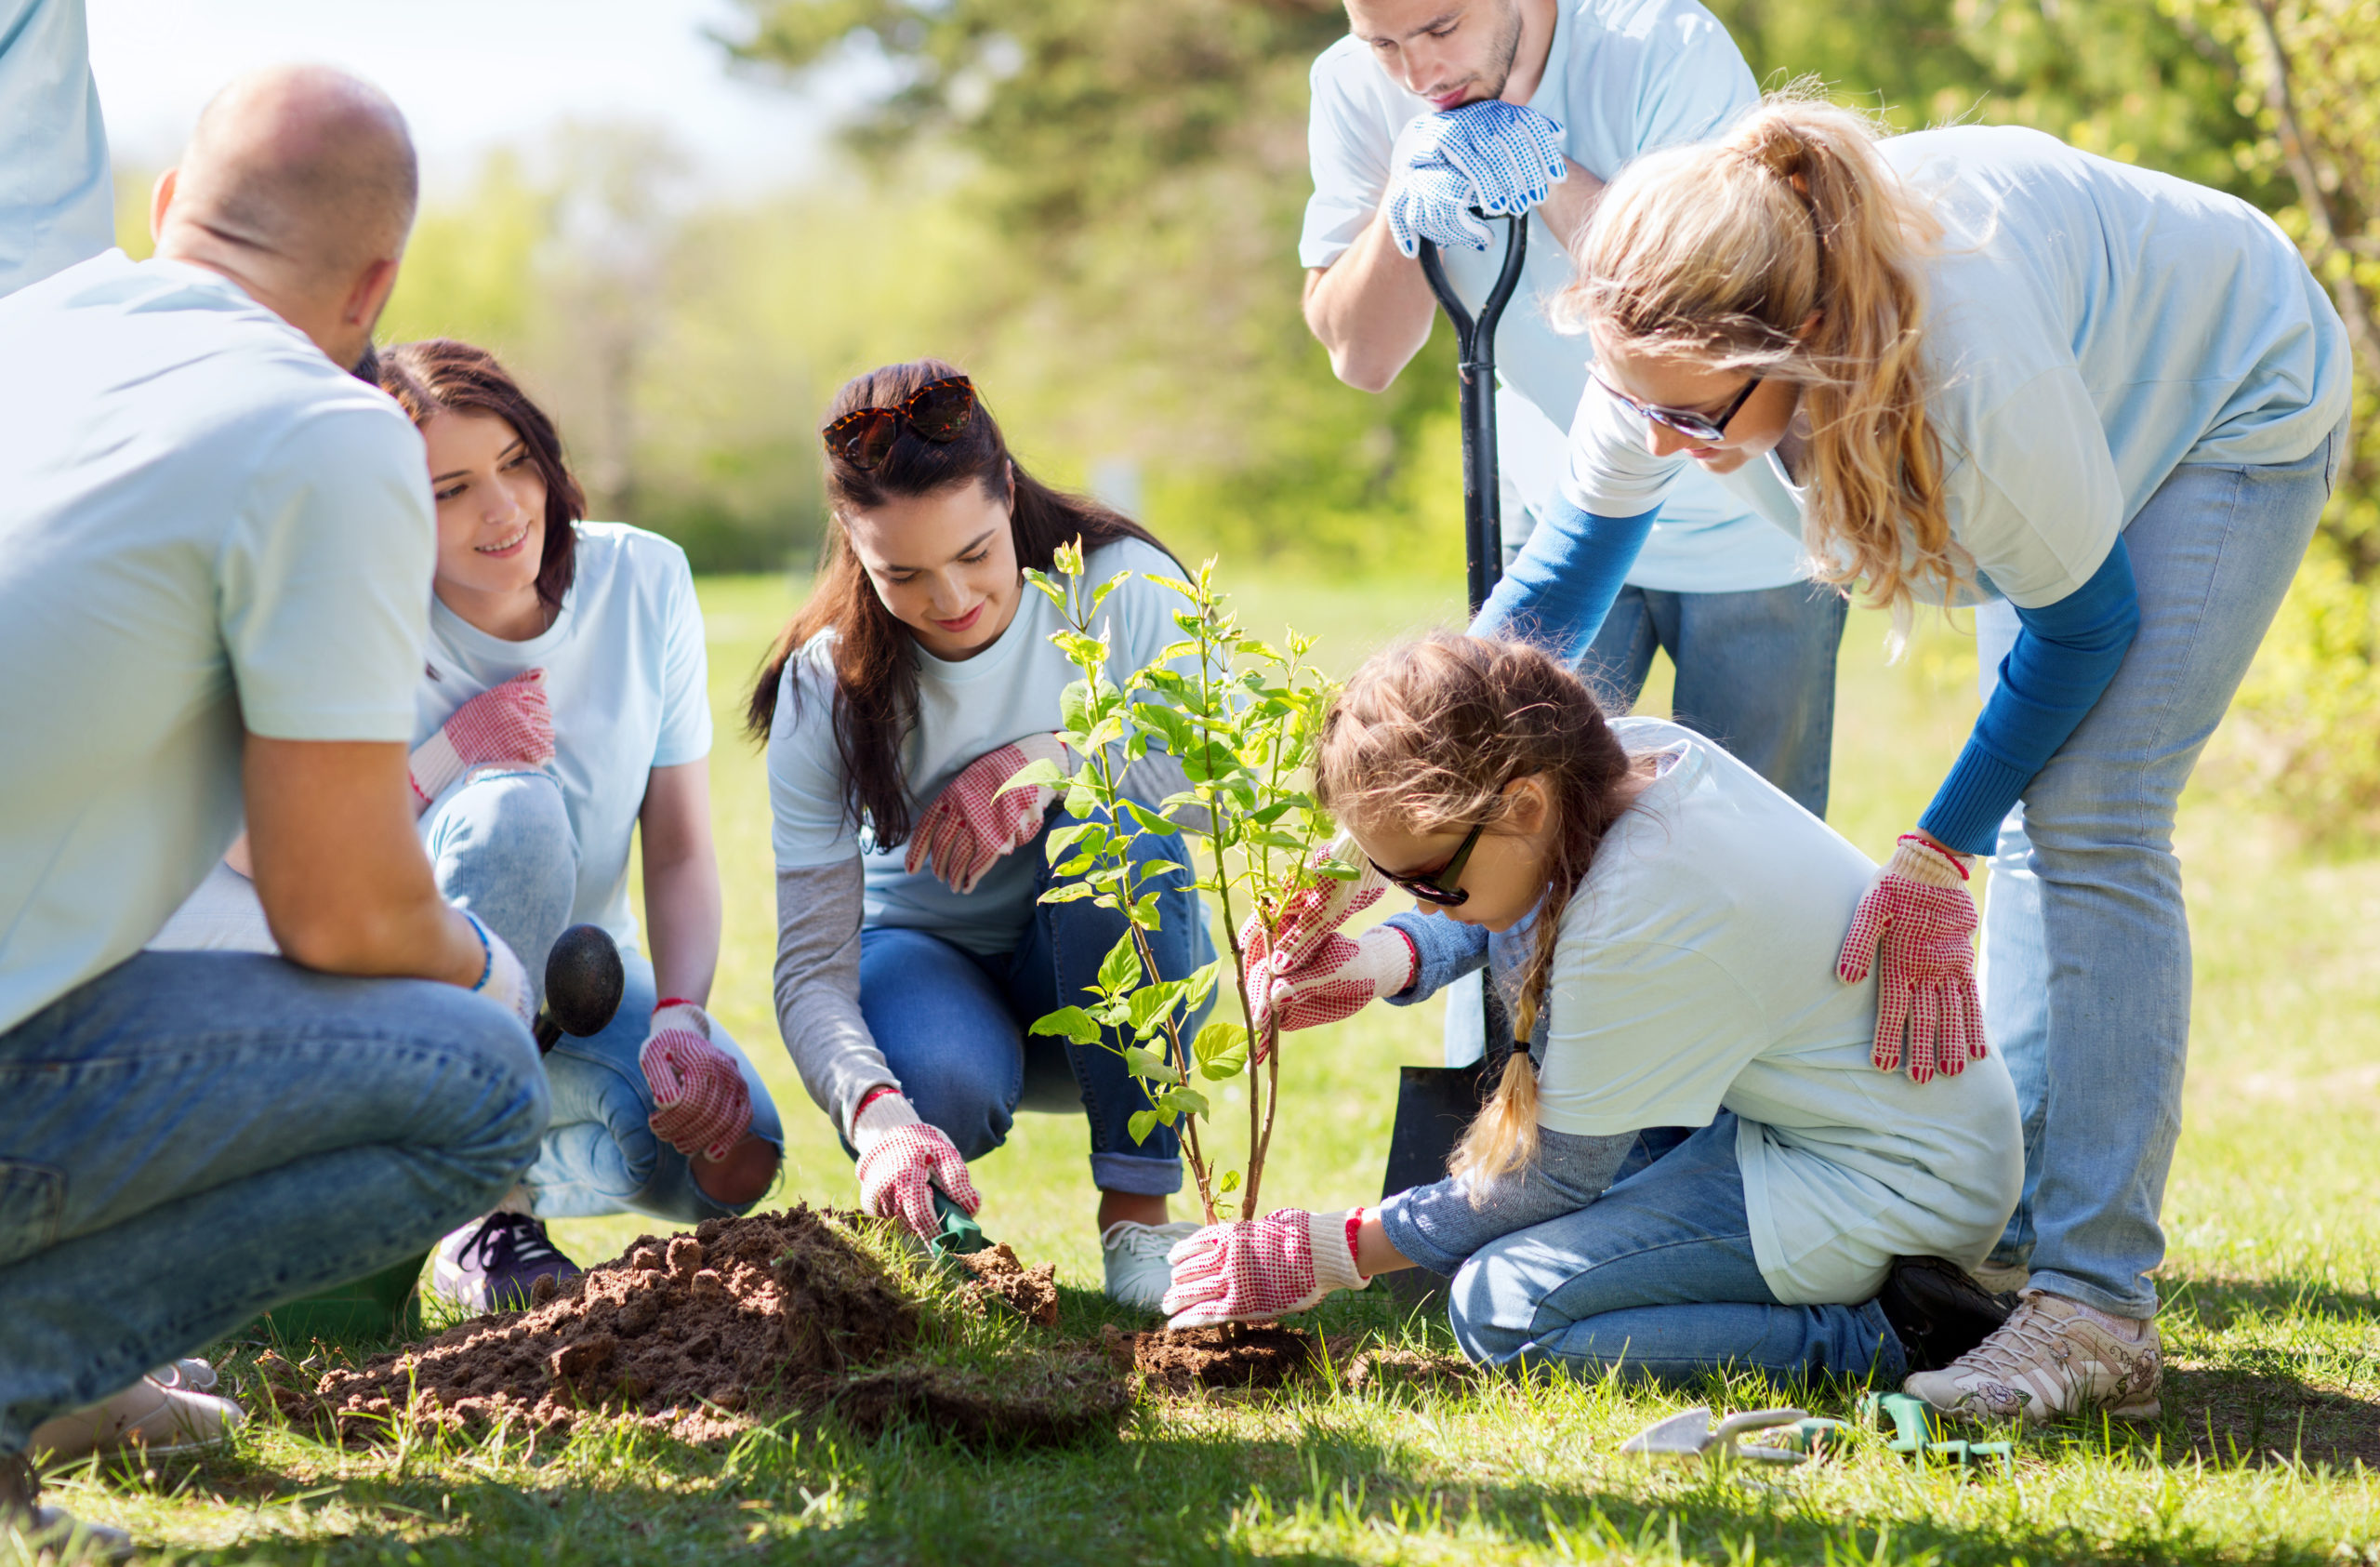 Six volunteers of a nonprofit wearing light blue tee shirts are planting a tree in a park. 